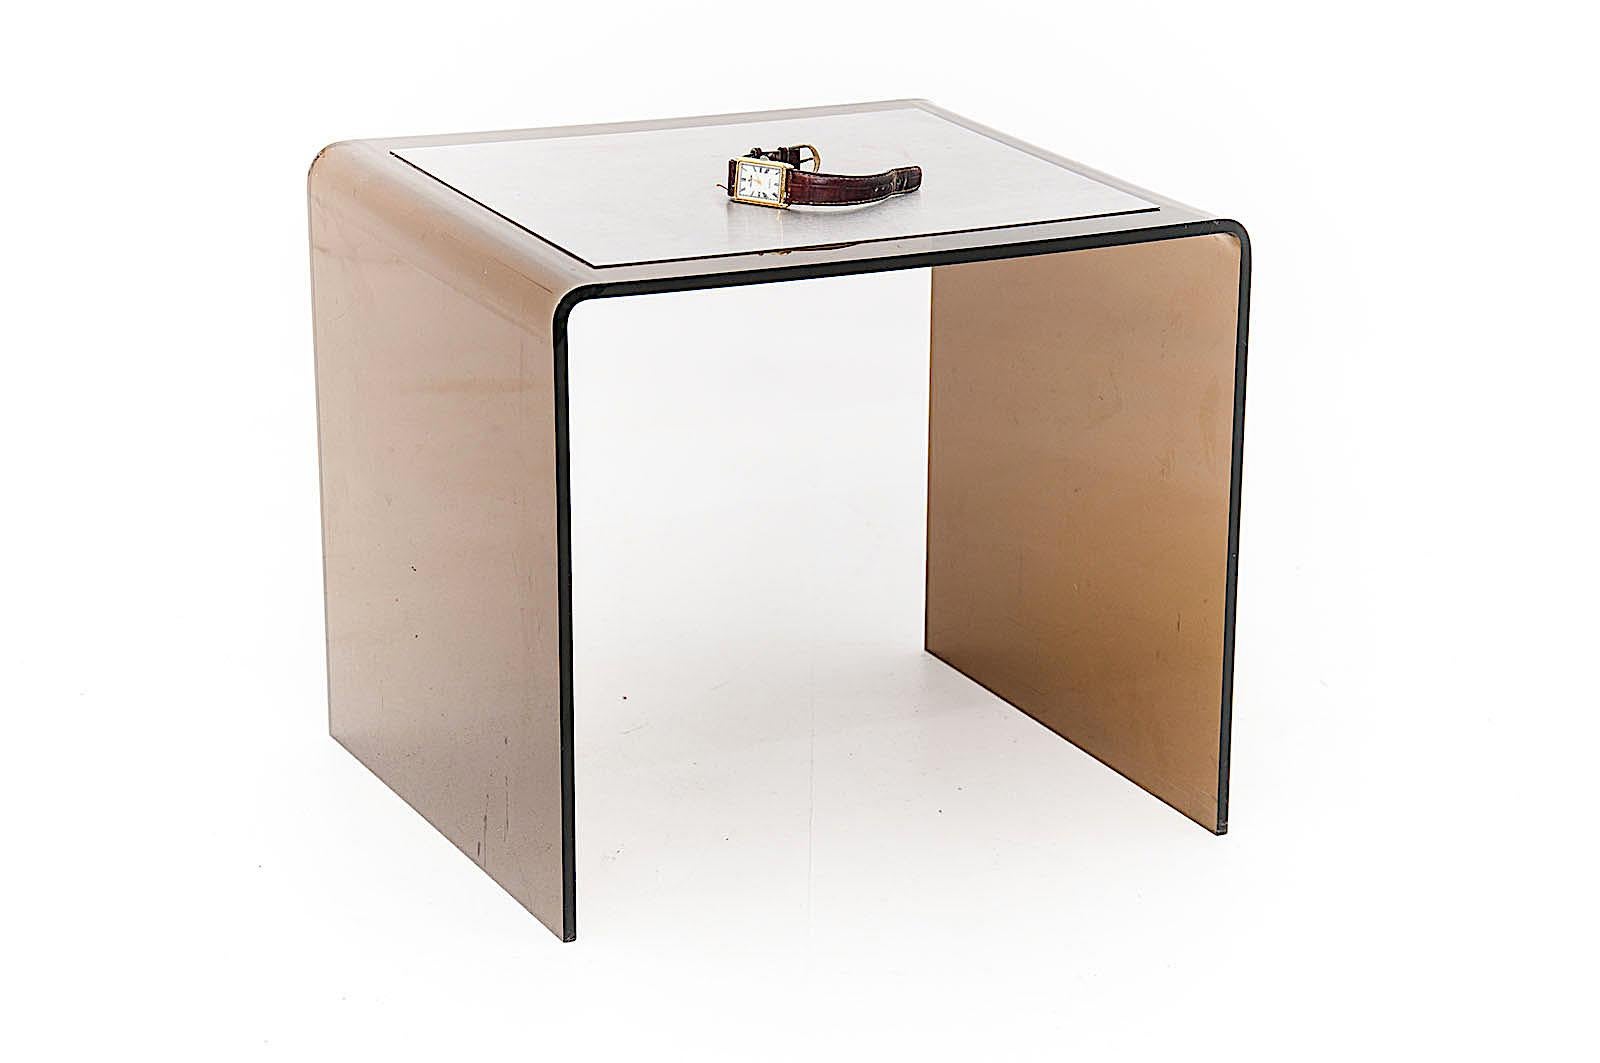 Space Age Side Table in Smoked Lucite & Aluminium Color, Waterfall Style, 1970 from France